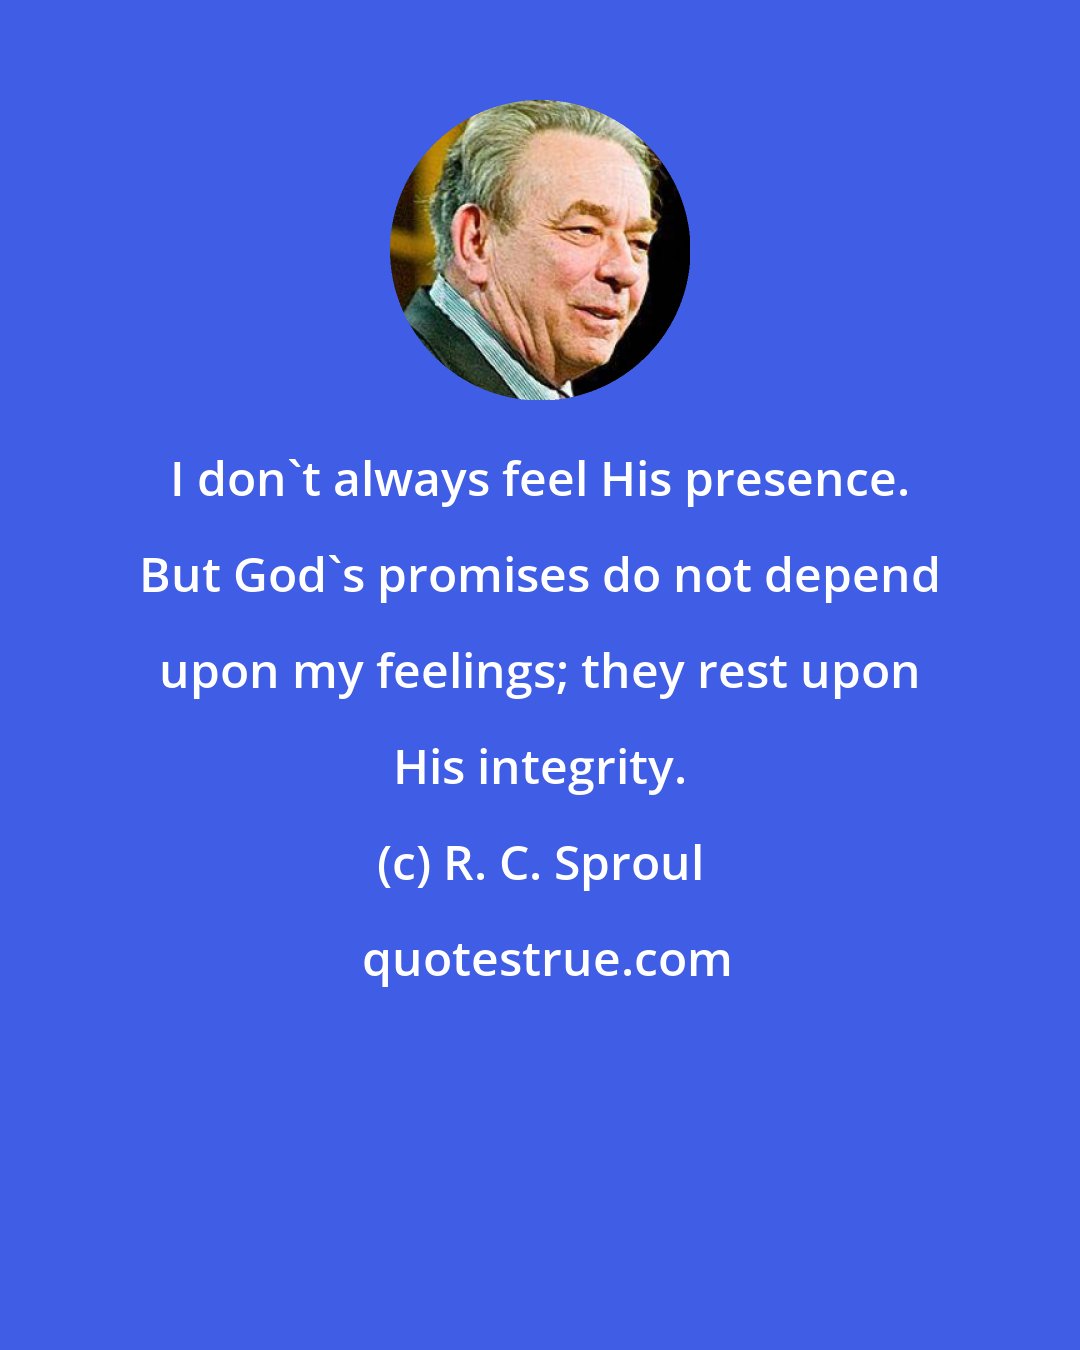 R. C. Sproul: I don't always feel His presence. But God's promises do not depend upon my feelings; they rest upon His integrity.